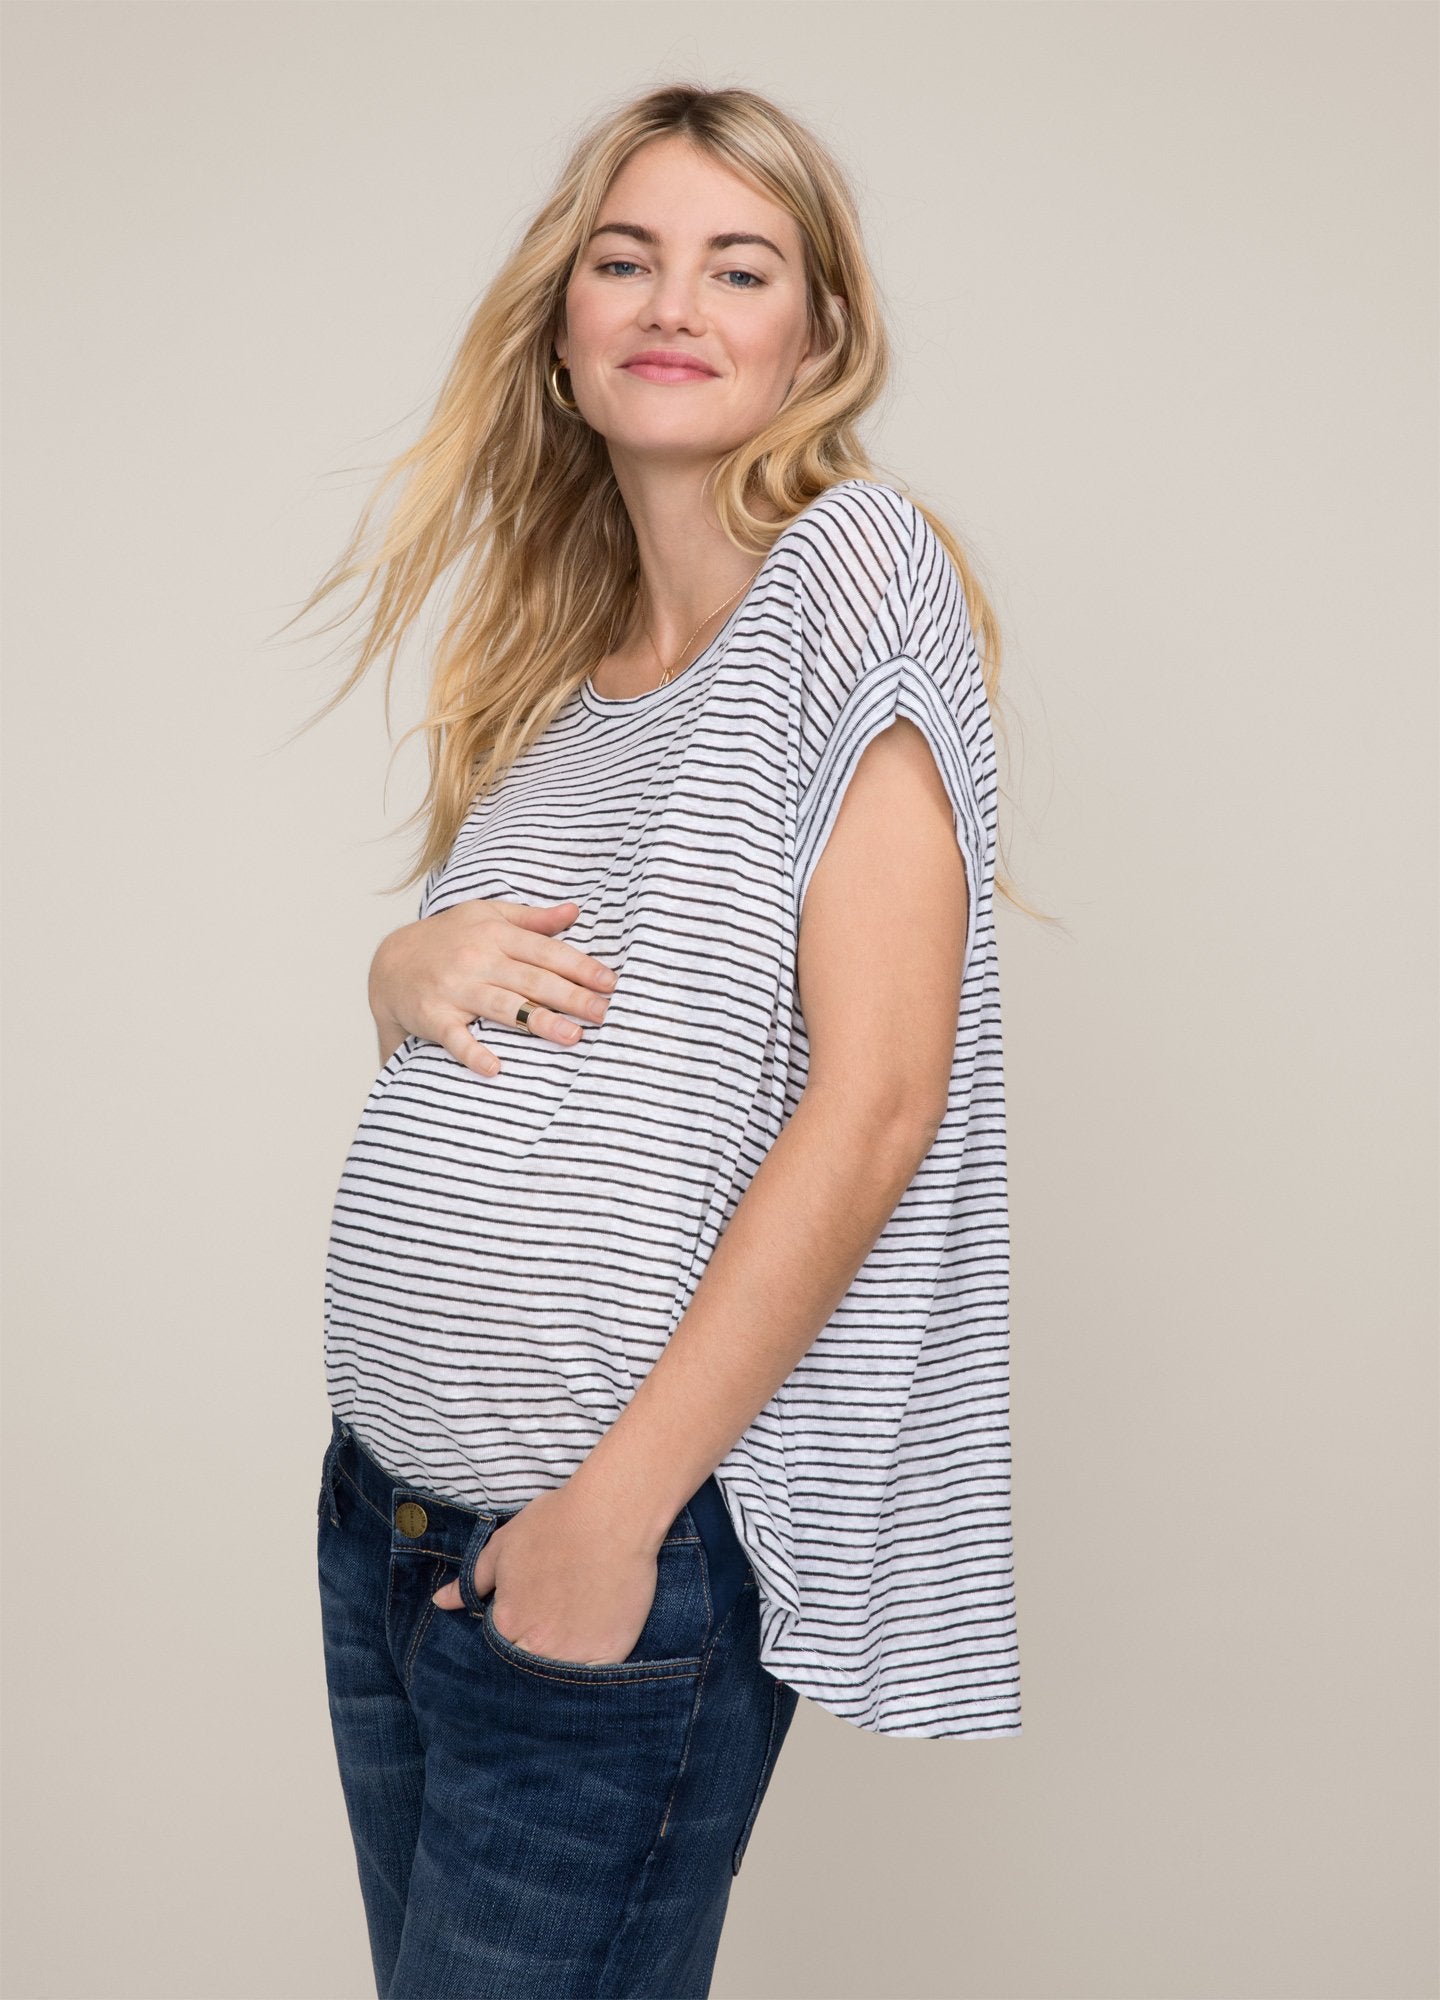 Hatch Collection Sale: Take 25% Off Select Maternity Clothes ...